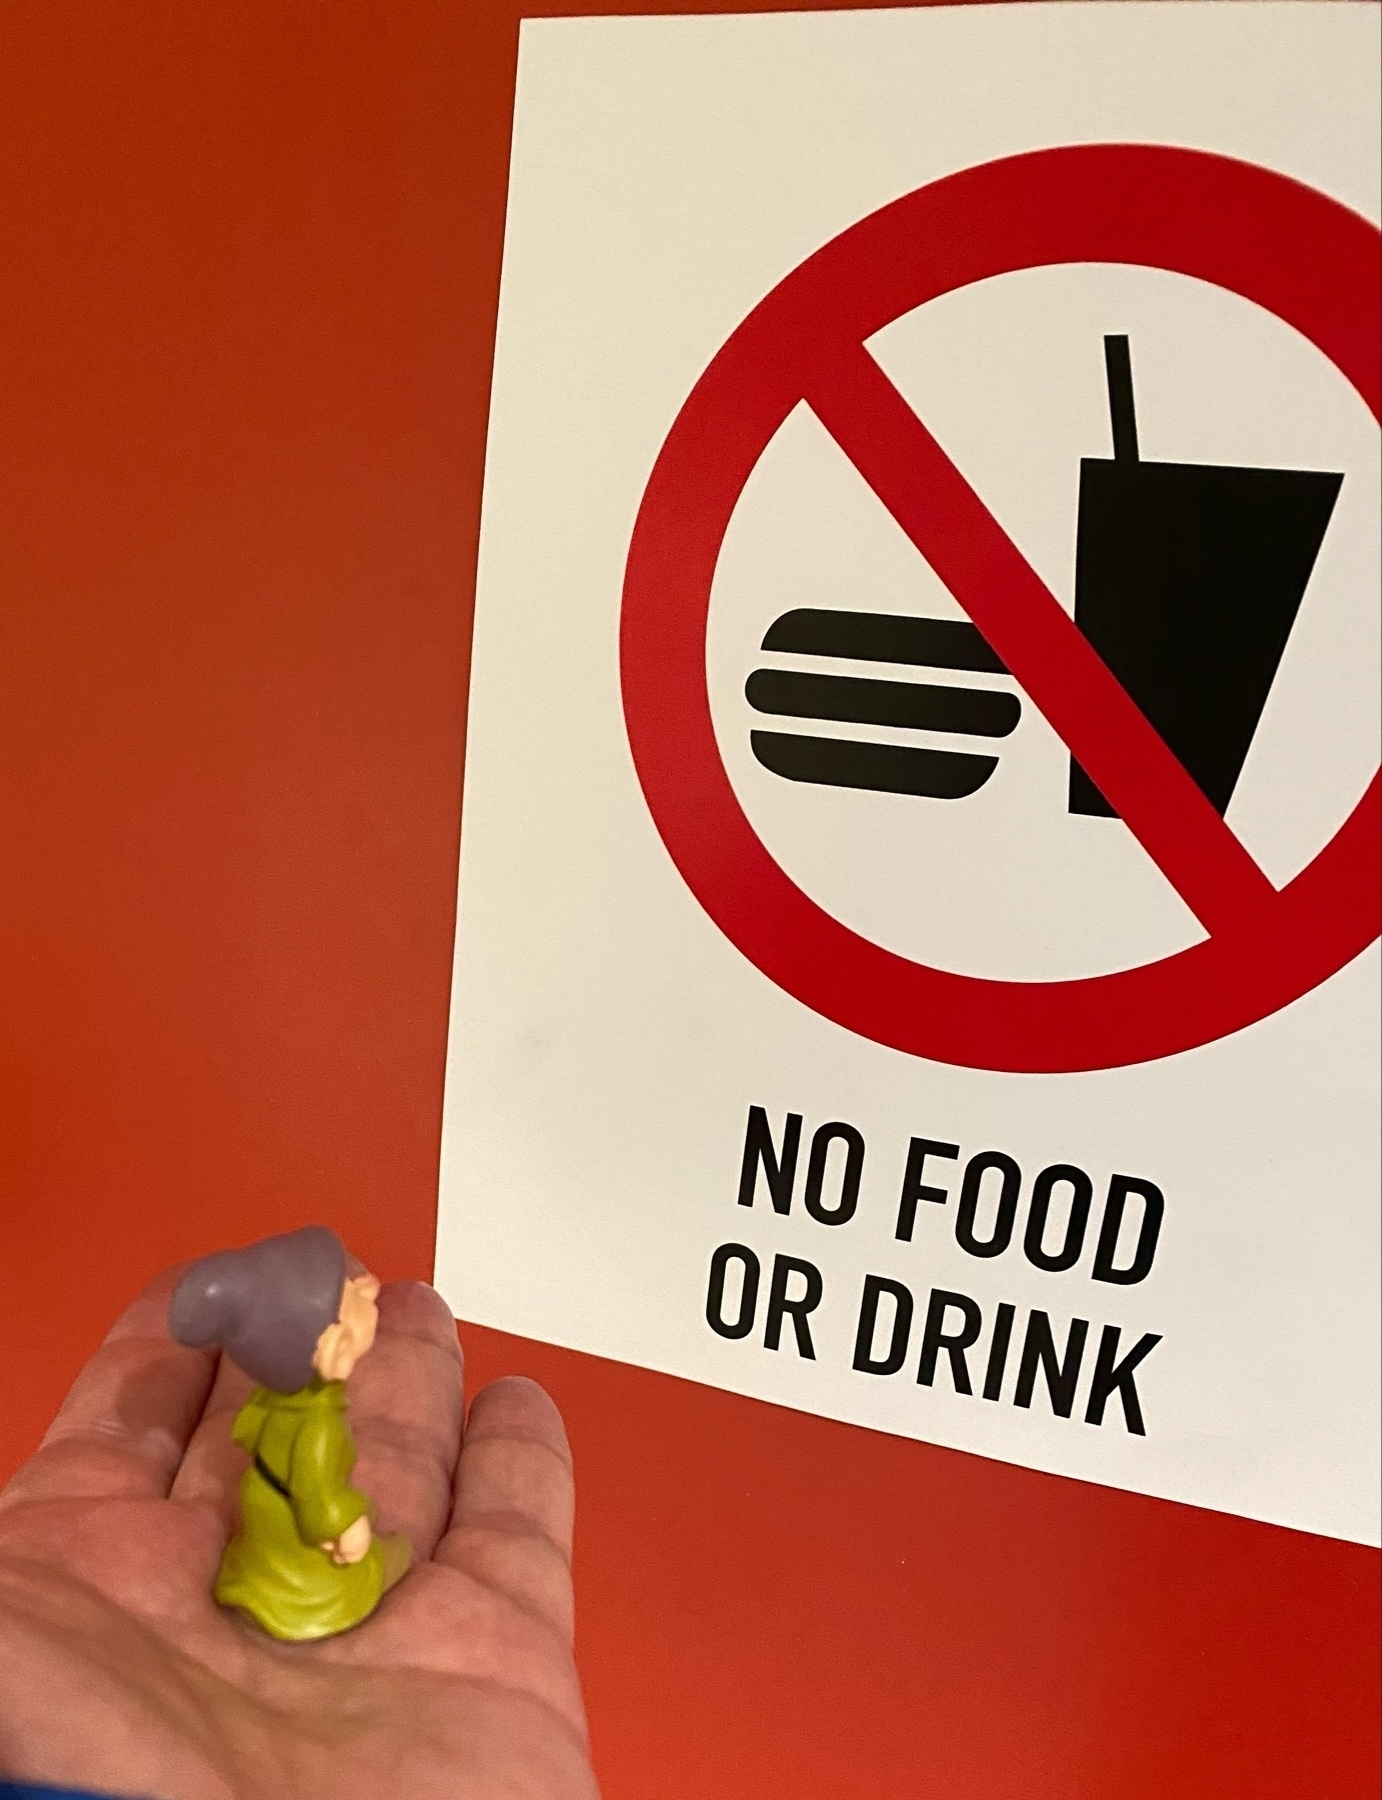 A person’s hand holding a small figurine in front of a sign that reads “NO FOOD OR DRINK” with a graphic symbol of no beverages and no burgers allowed.